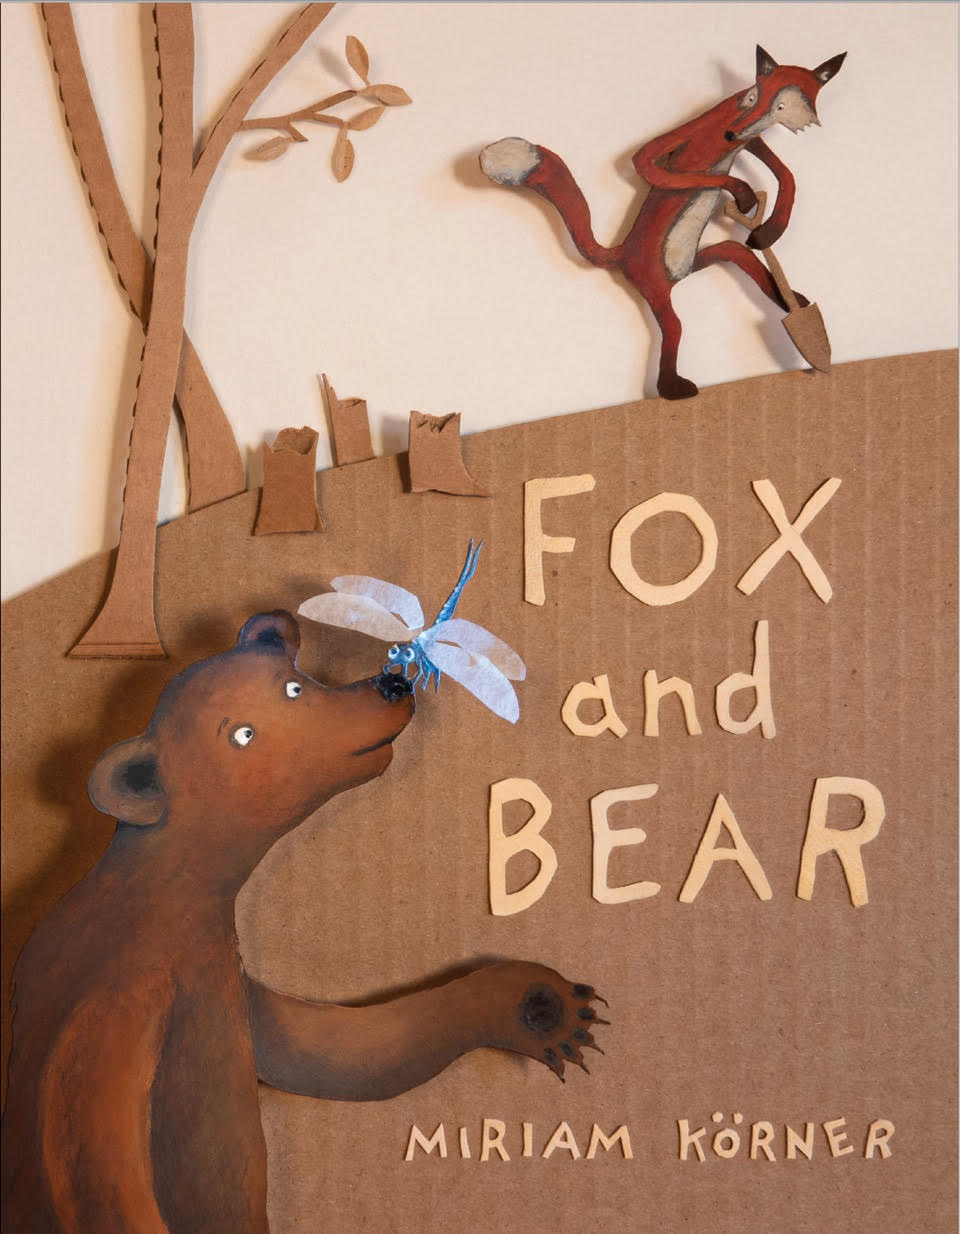 "Fox and Bear" by Miriam Körner. Published by Red Deer Press on October 27, 2022. 